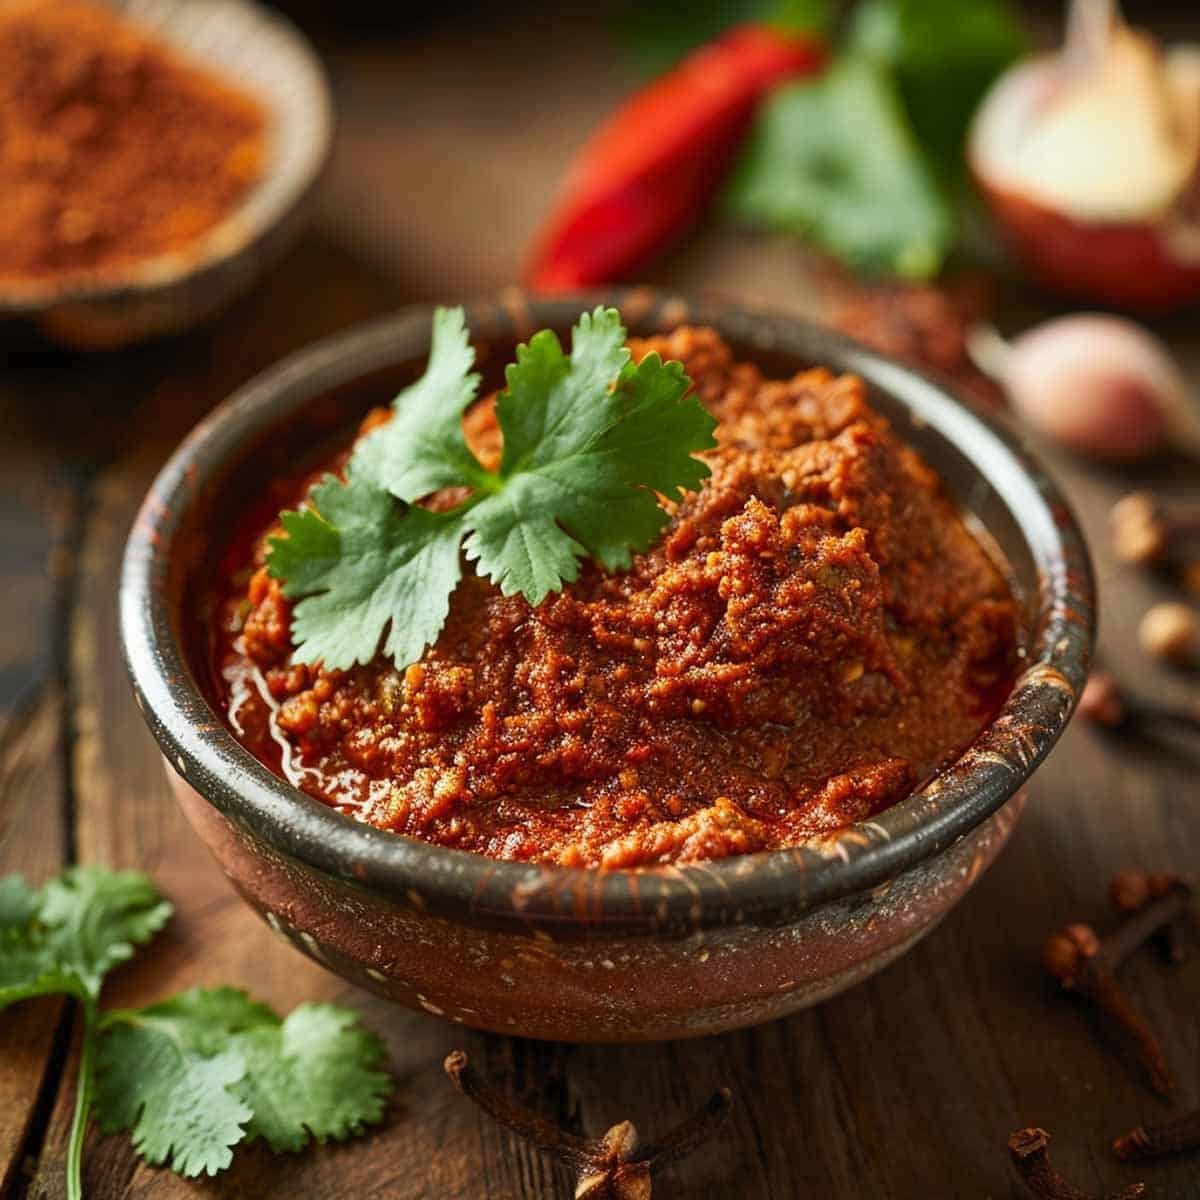 Homemade Massaman Curry Paste in a bowl with fresh ingredients like lemongrass, galangal, and spices surrounding it."